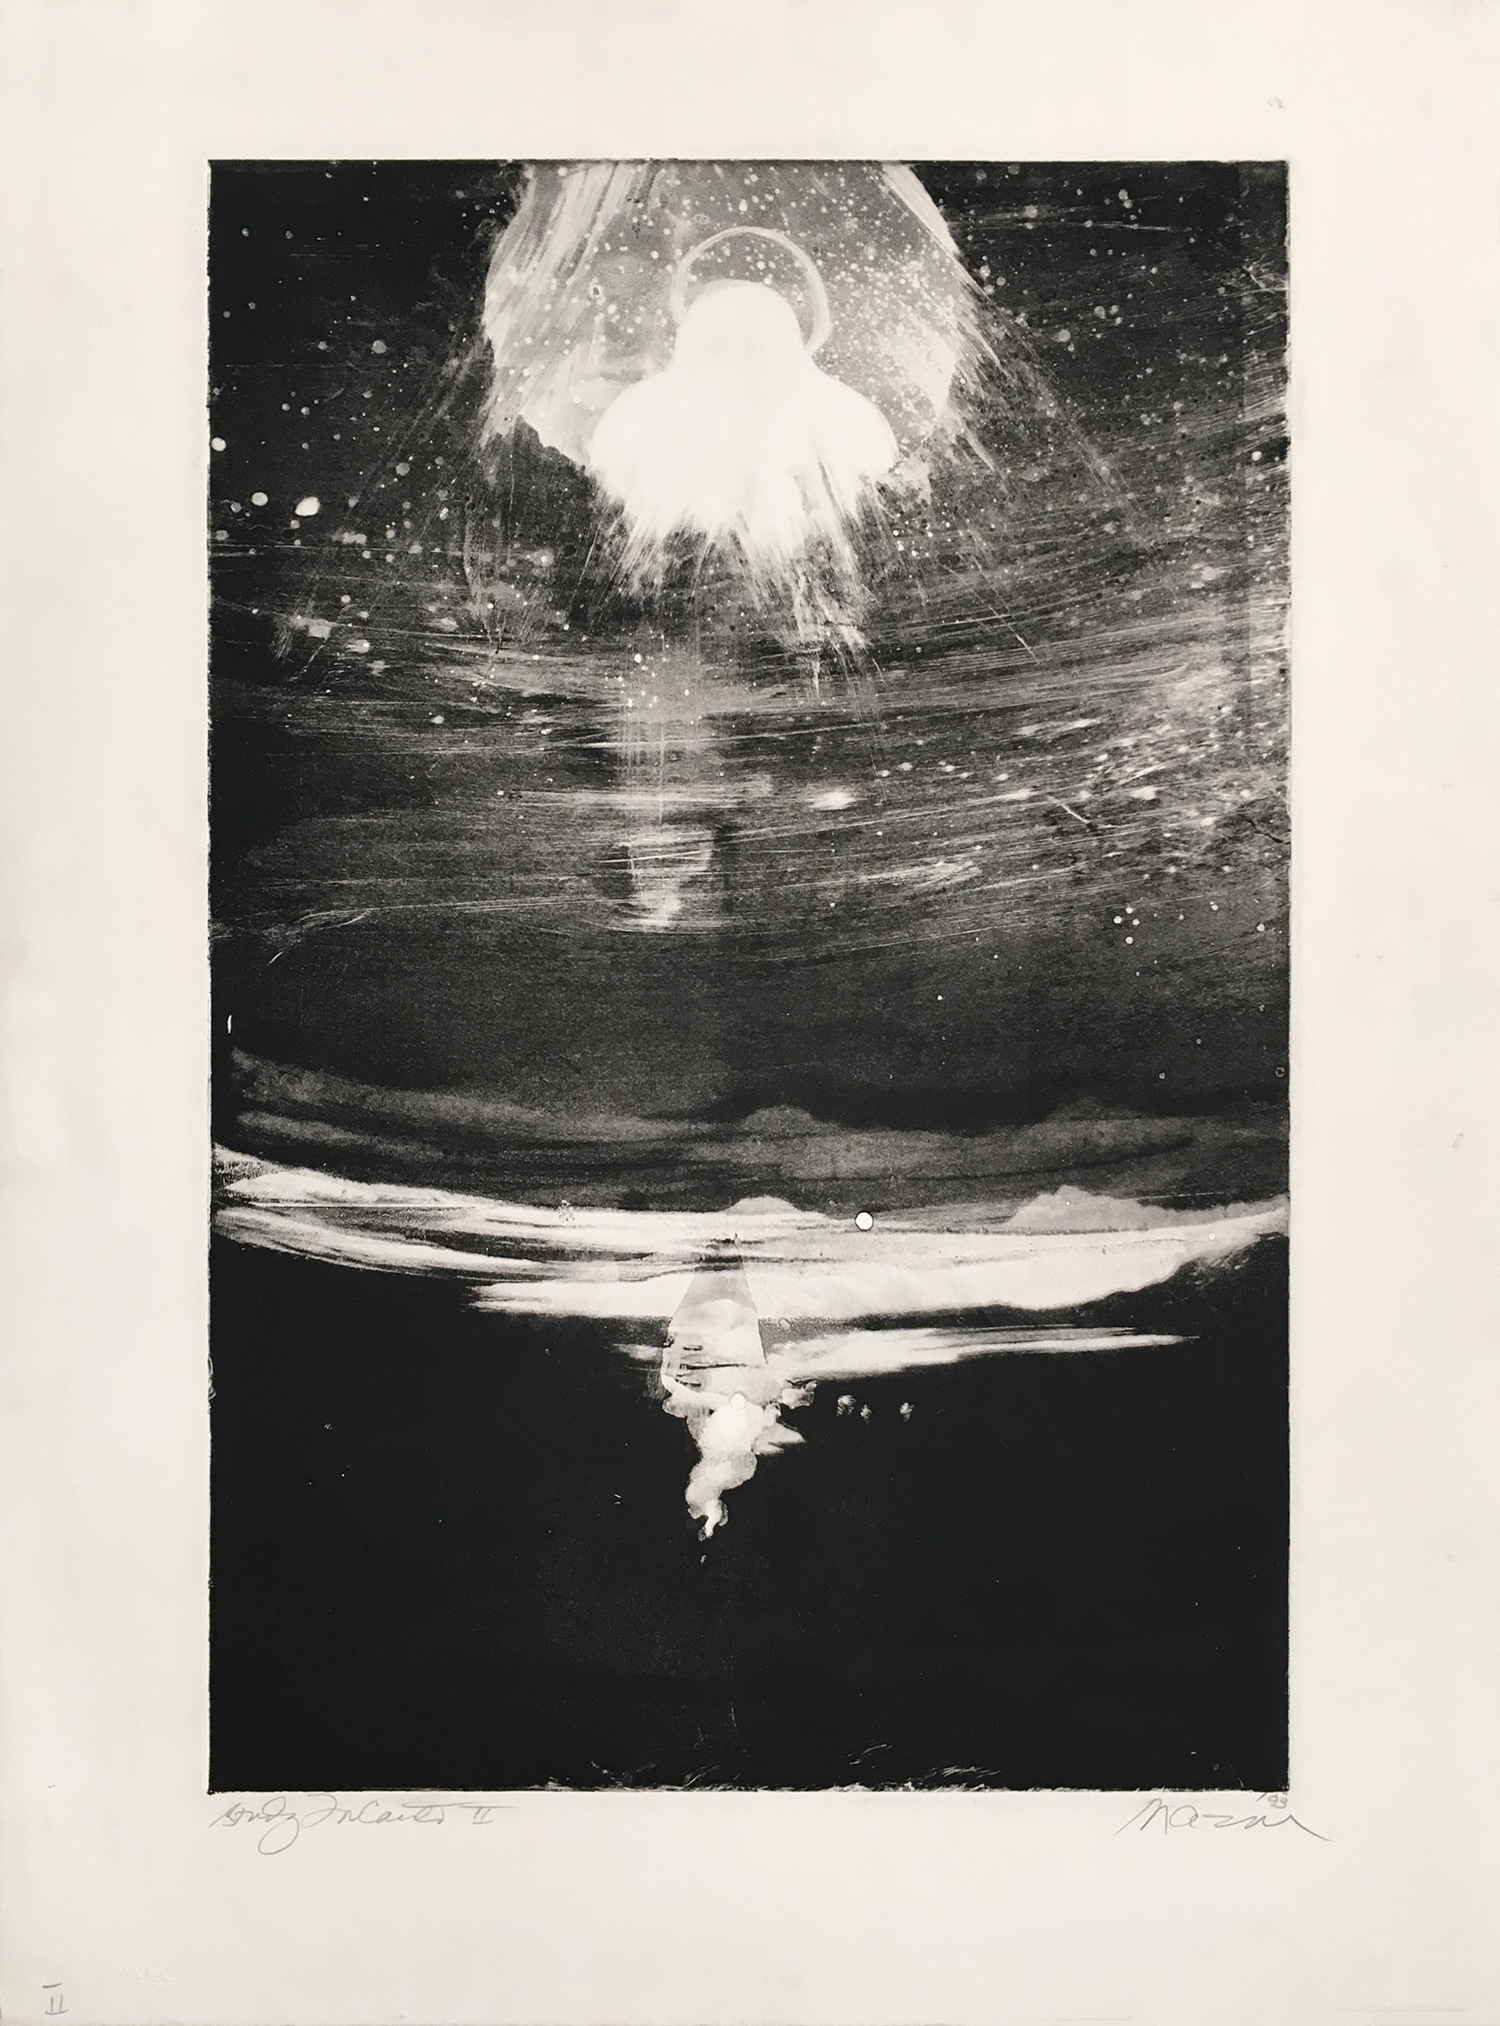 Michael Mazur Study for Canto II, 1993 Monotype 30 x 22 inches (76.2 x 55.88 cm)